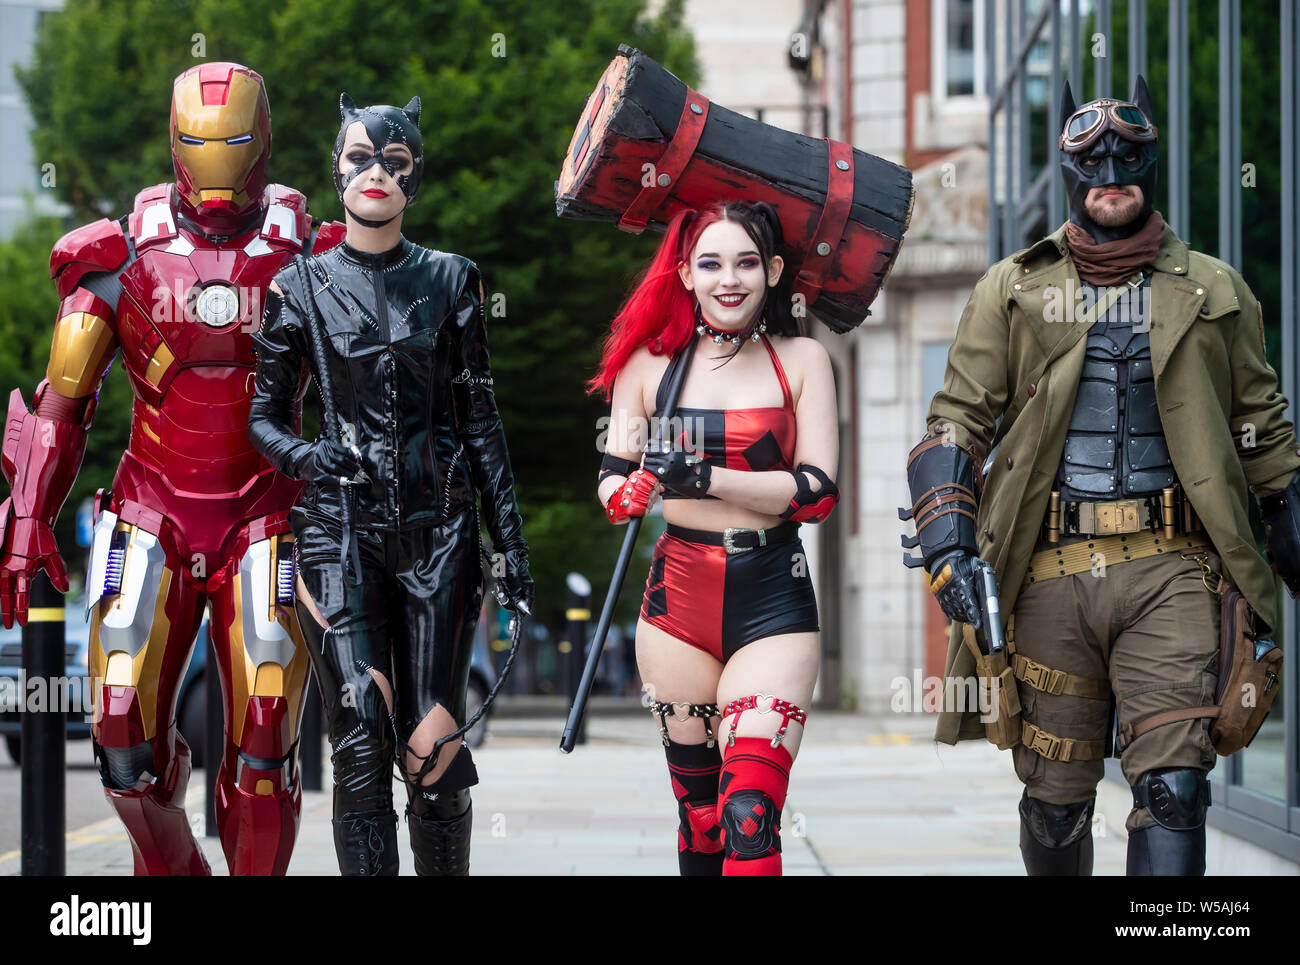 People dressed as characters (left to right) Iron Man, Cat woman, Harley Quinn from New 52 comics and Nightmare Batman during the MCM Manchester Comic Con which see thousands of sci-fi fans, gamers, comic collectors, movie buffs and anime enthusiasts visit Manchester Central. Stock Photo